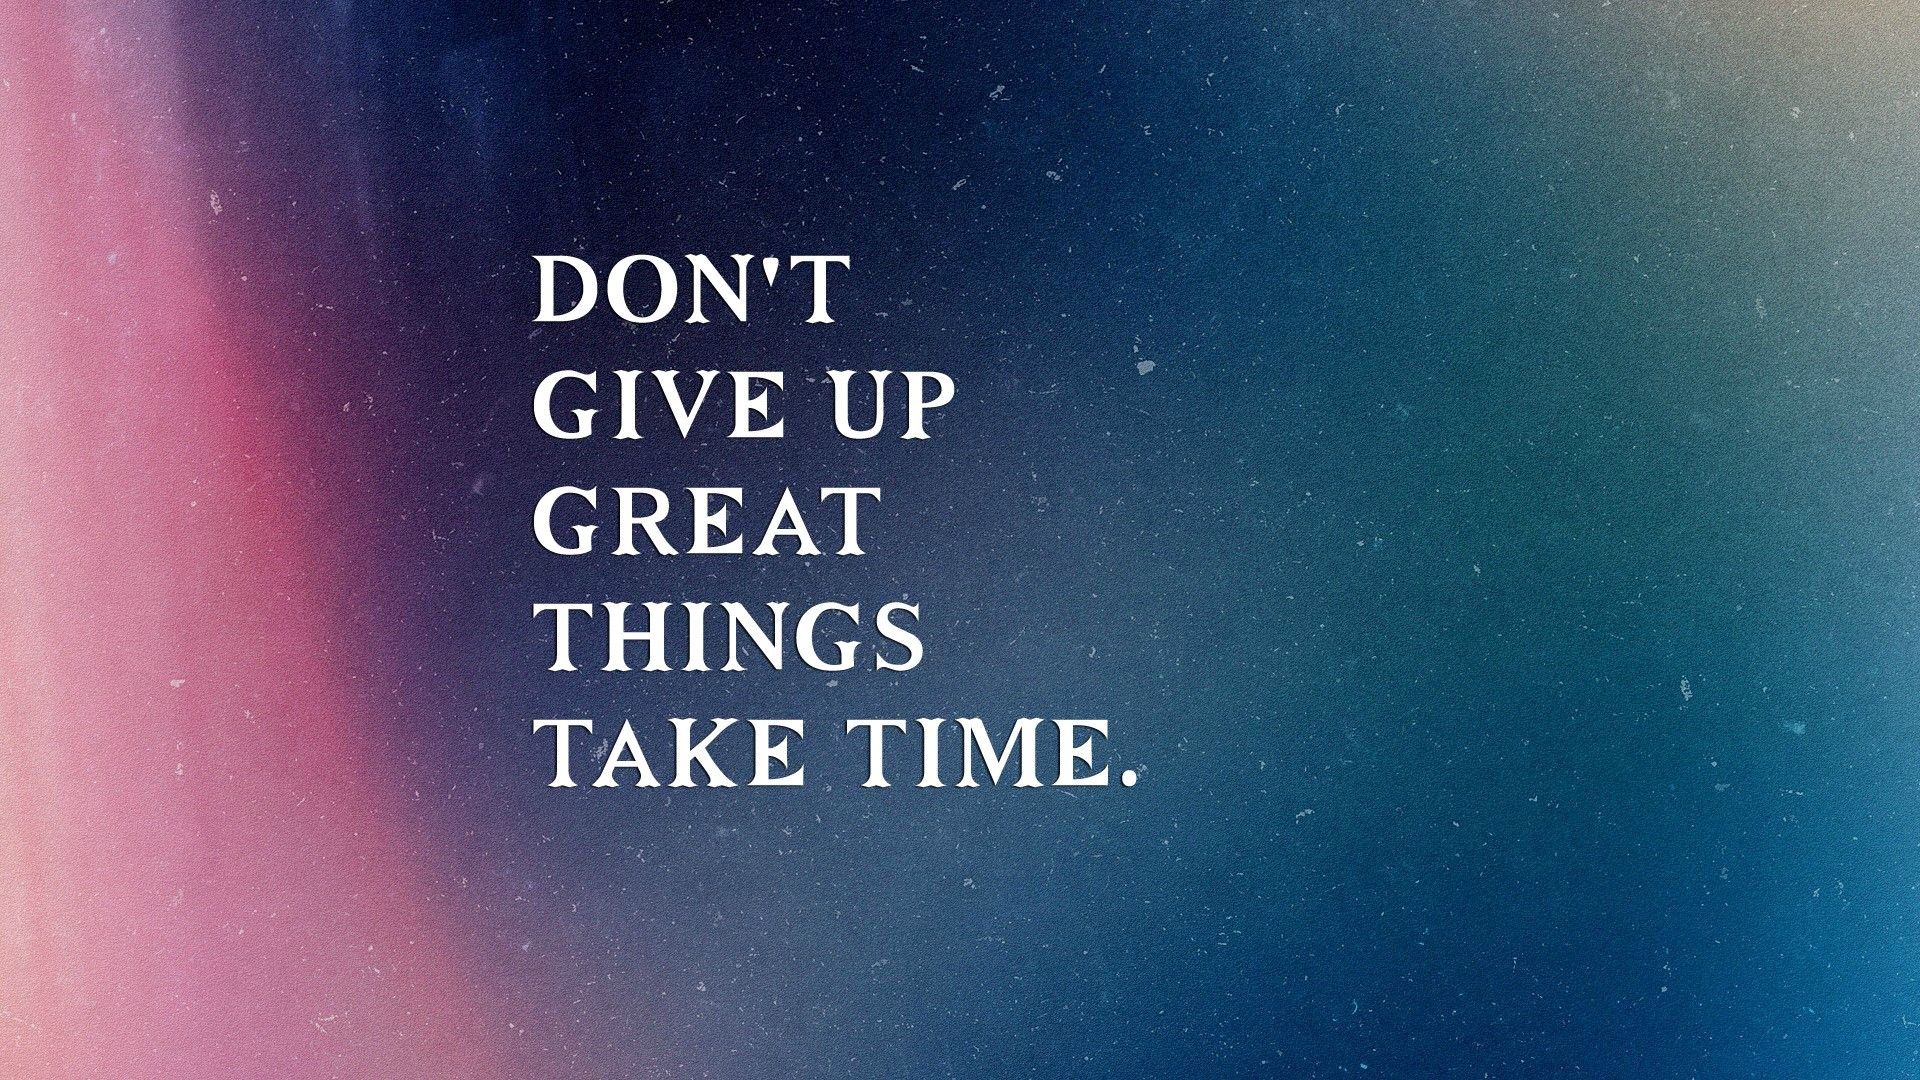 50 Best Motivational Wallpapers With Inspiring Quotes.